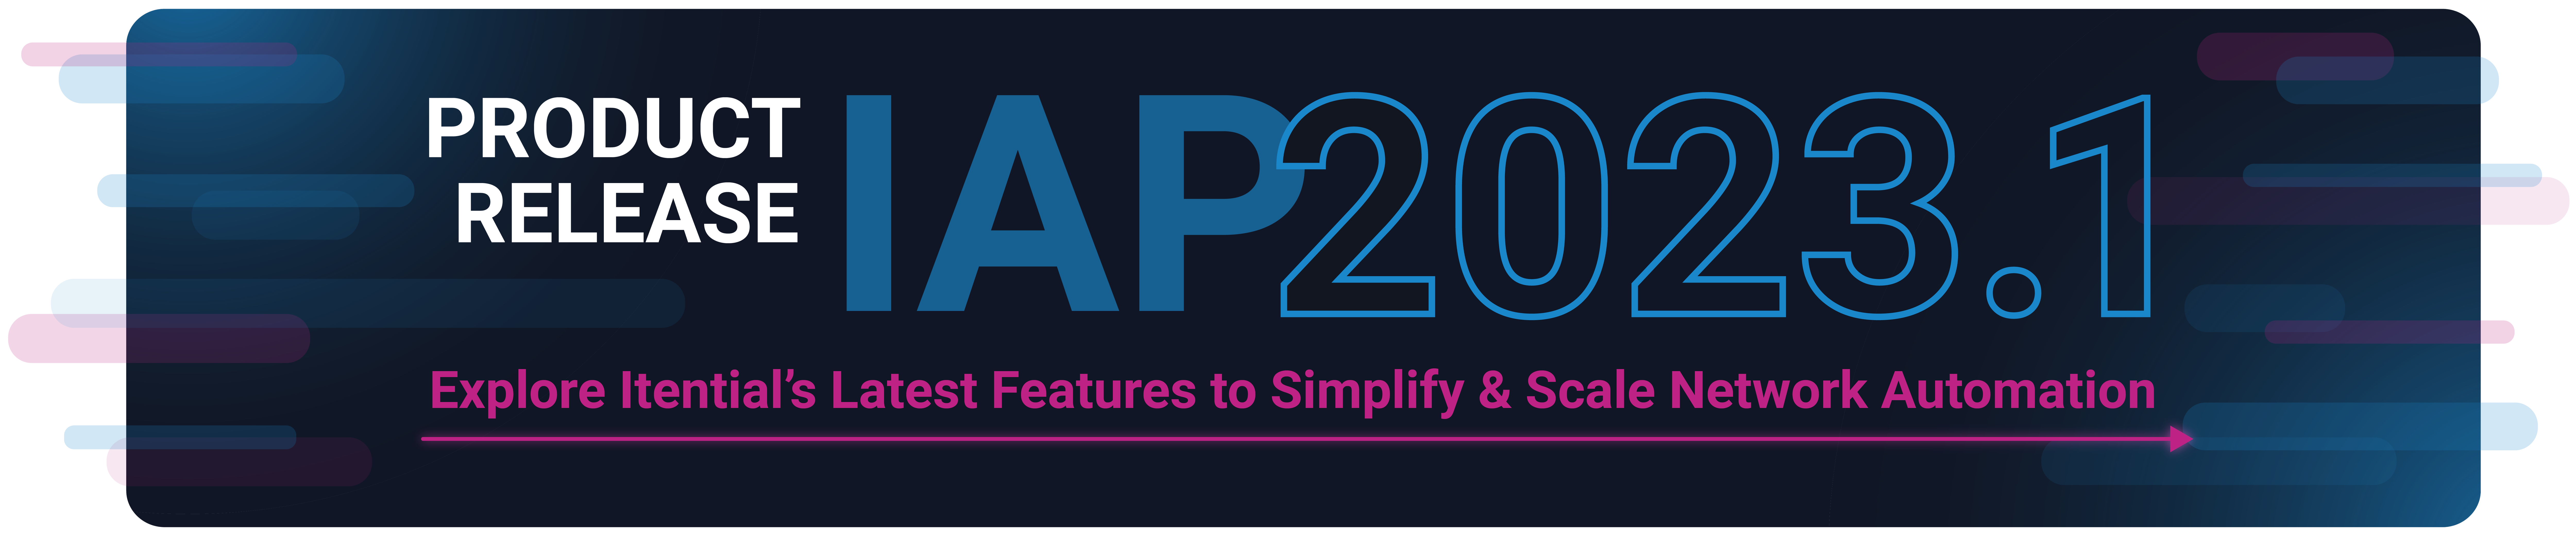 Product Release: IAP 2023.1